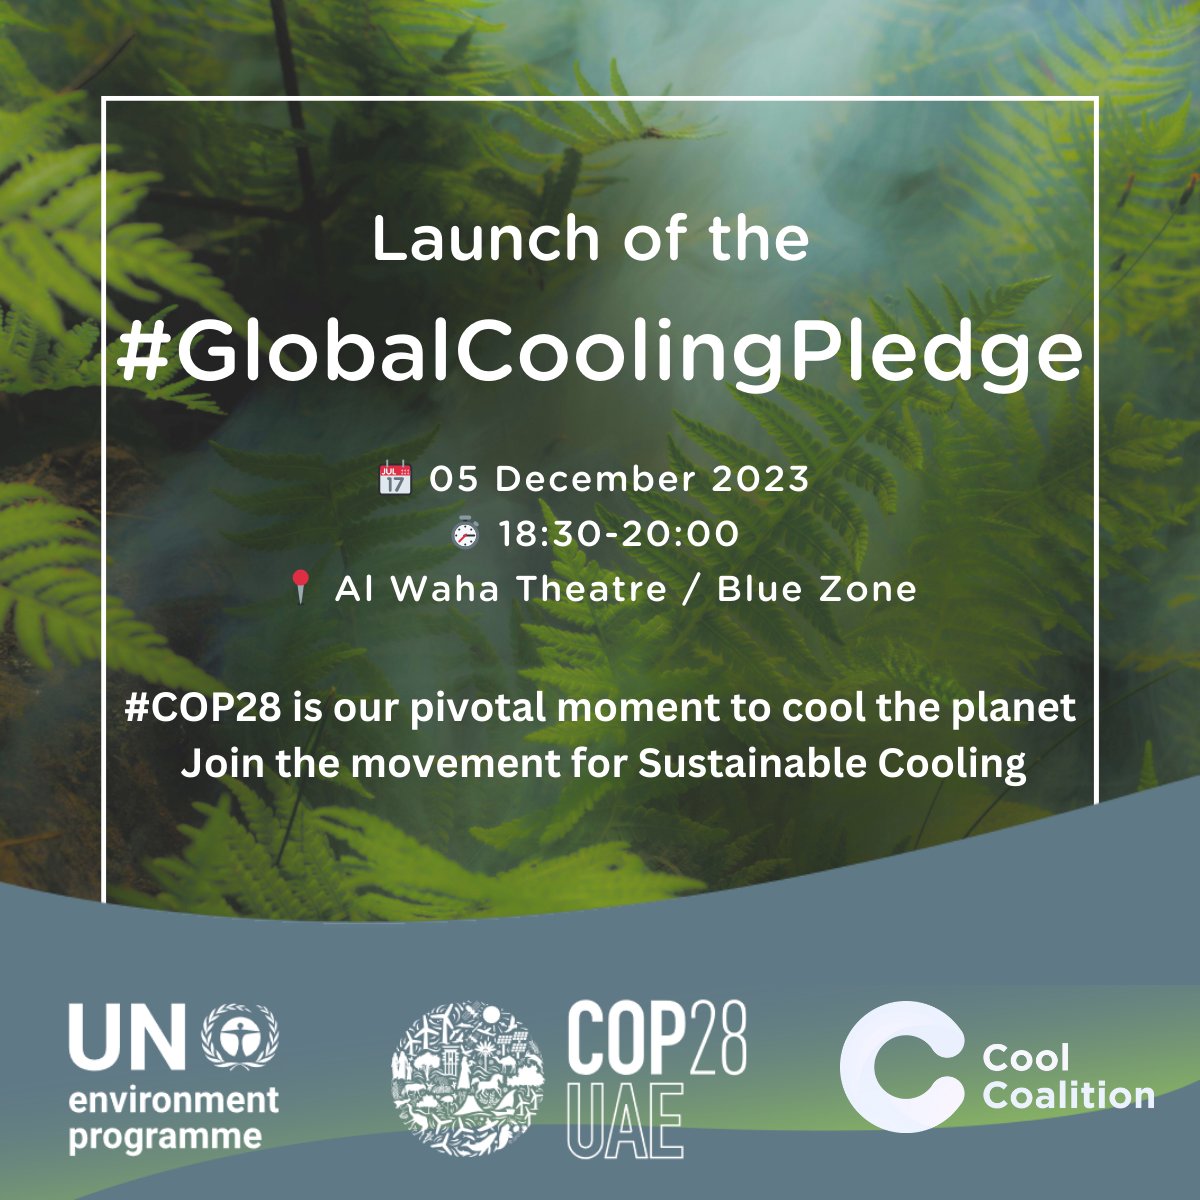 Don't miss the launch of the #GlobalCoolingPledge today at 6:30 pm GST (9:30 am EST)!

Now is the time to act on cooling to ensure a cooler, more resilient future for all.

Watch live ➡️ unfccc.int/event/global-c…

#COP28 #ActOnCooling #CoolingForAll #CoolingDay #ClimateAction